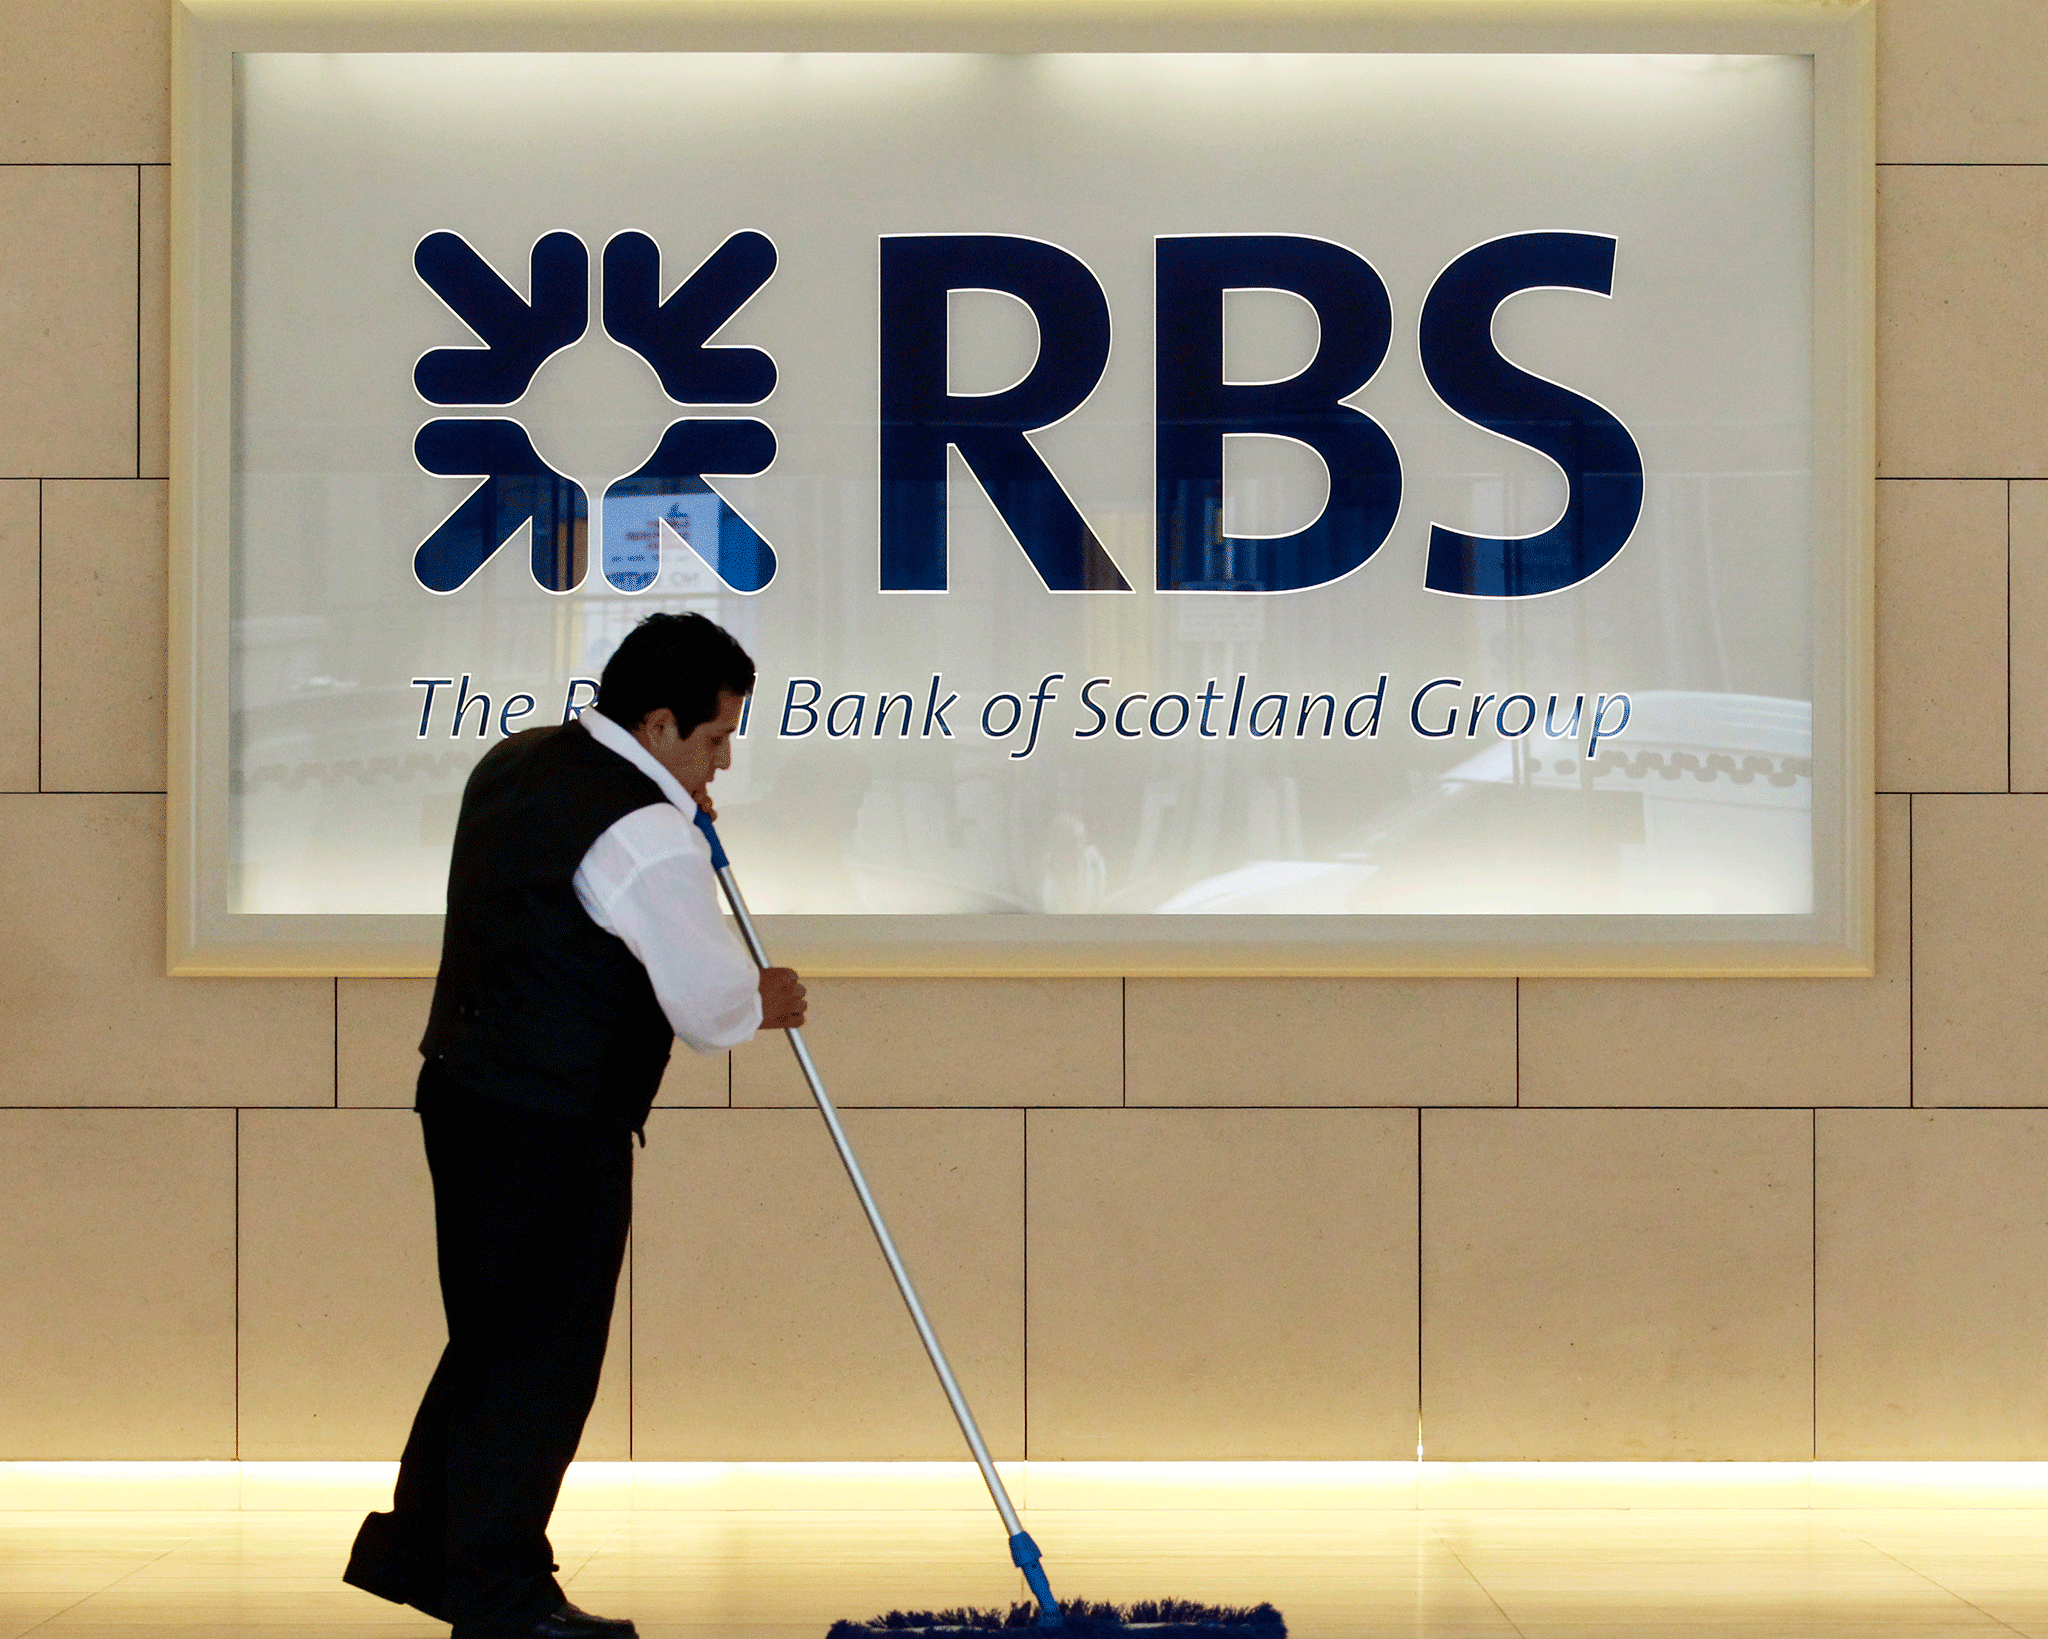 Philip Hammond was right to halt the re-privatisation of RBS